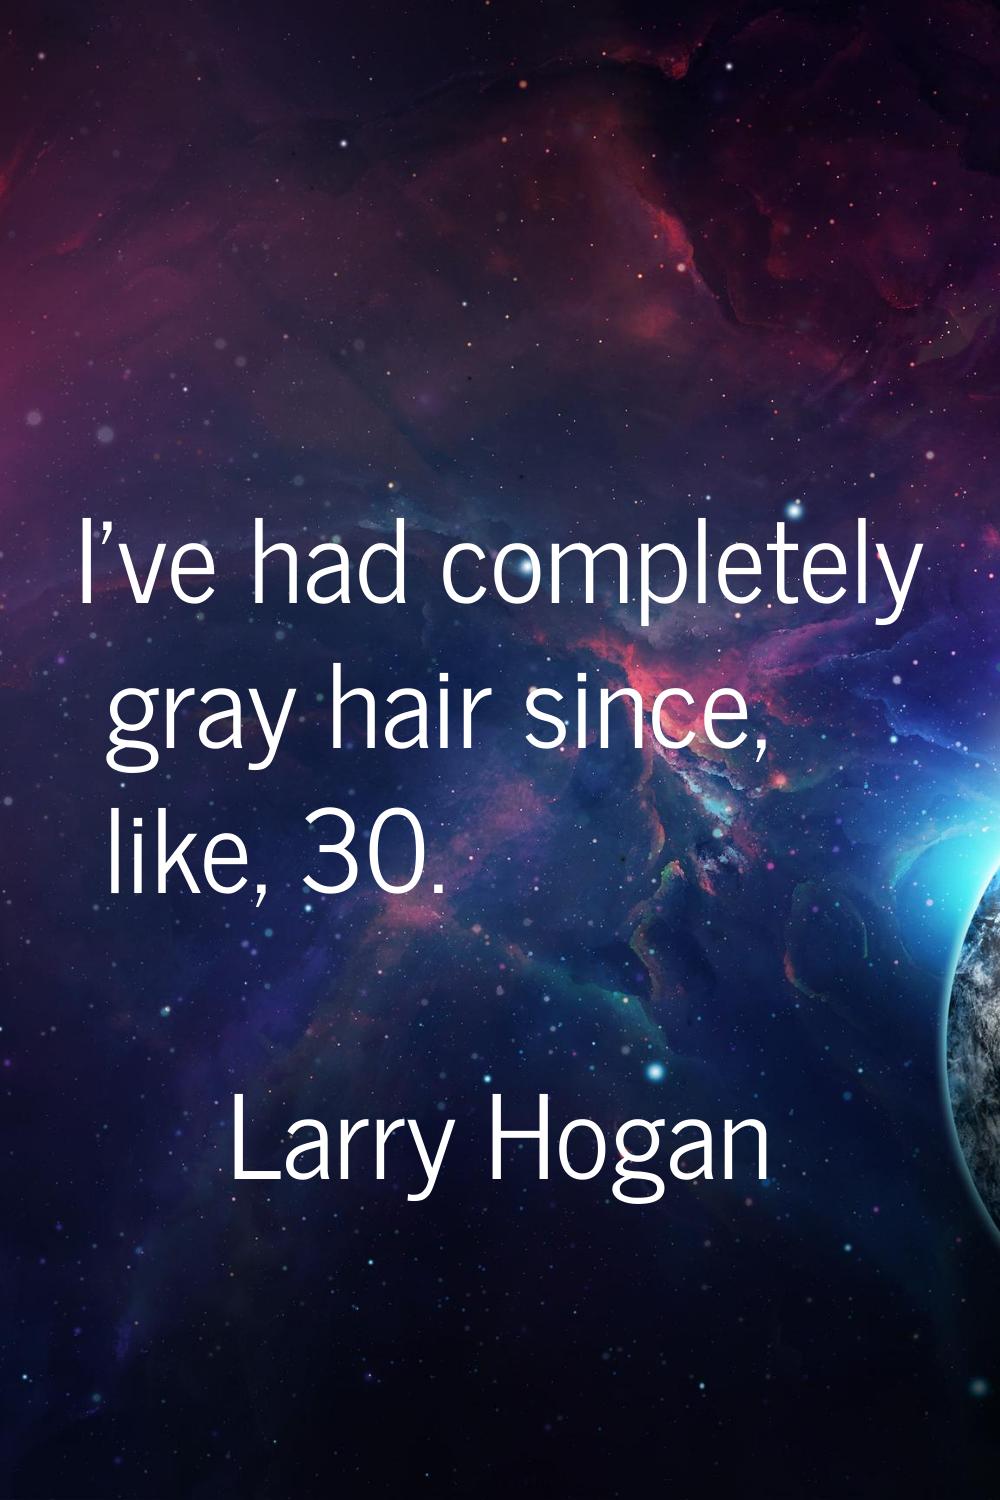 I've had completely gray hair since, like, 30.